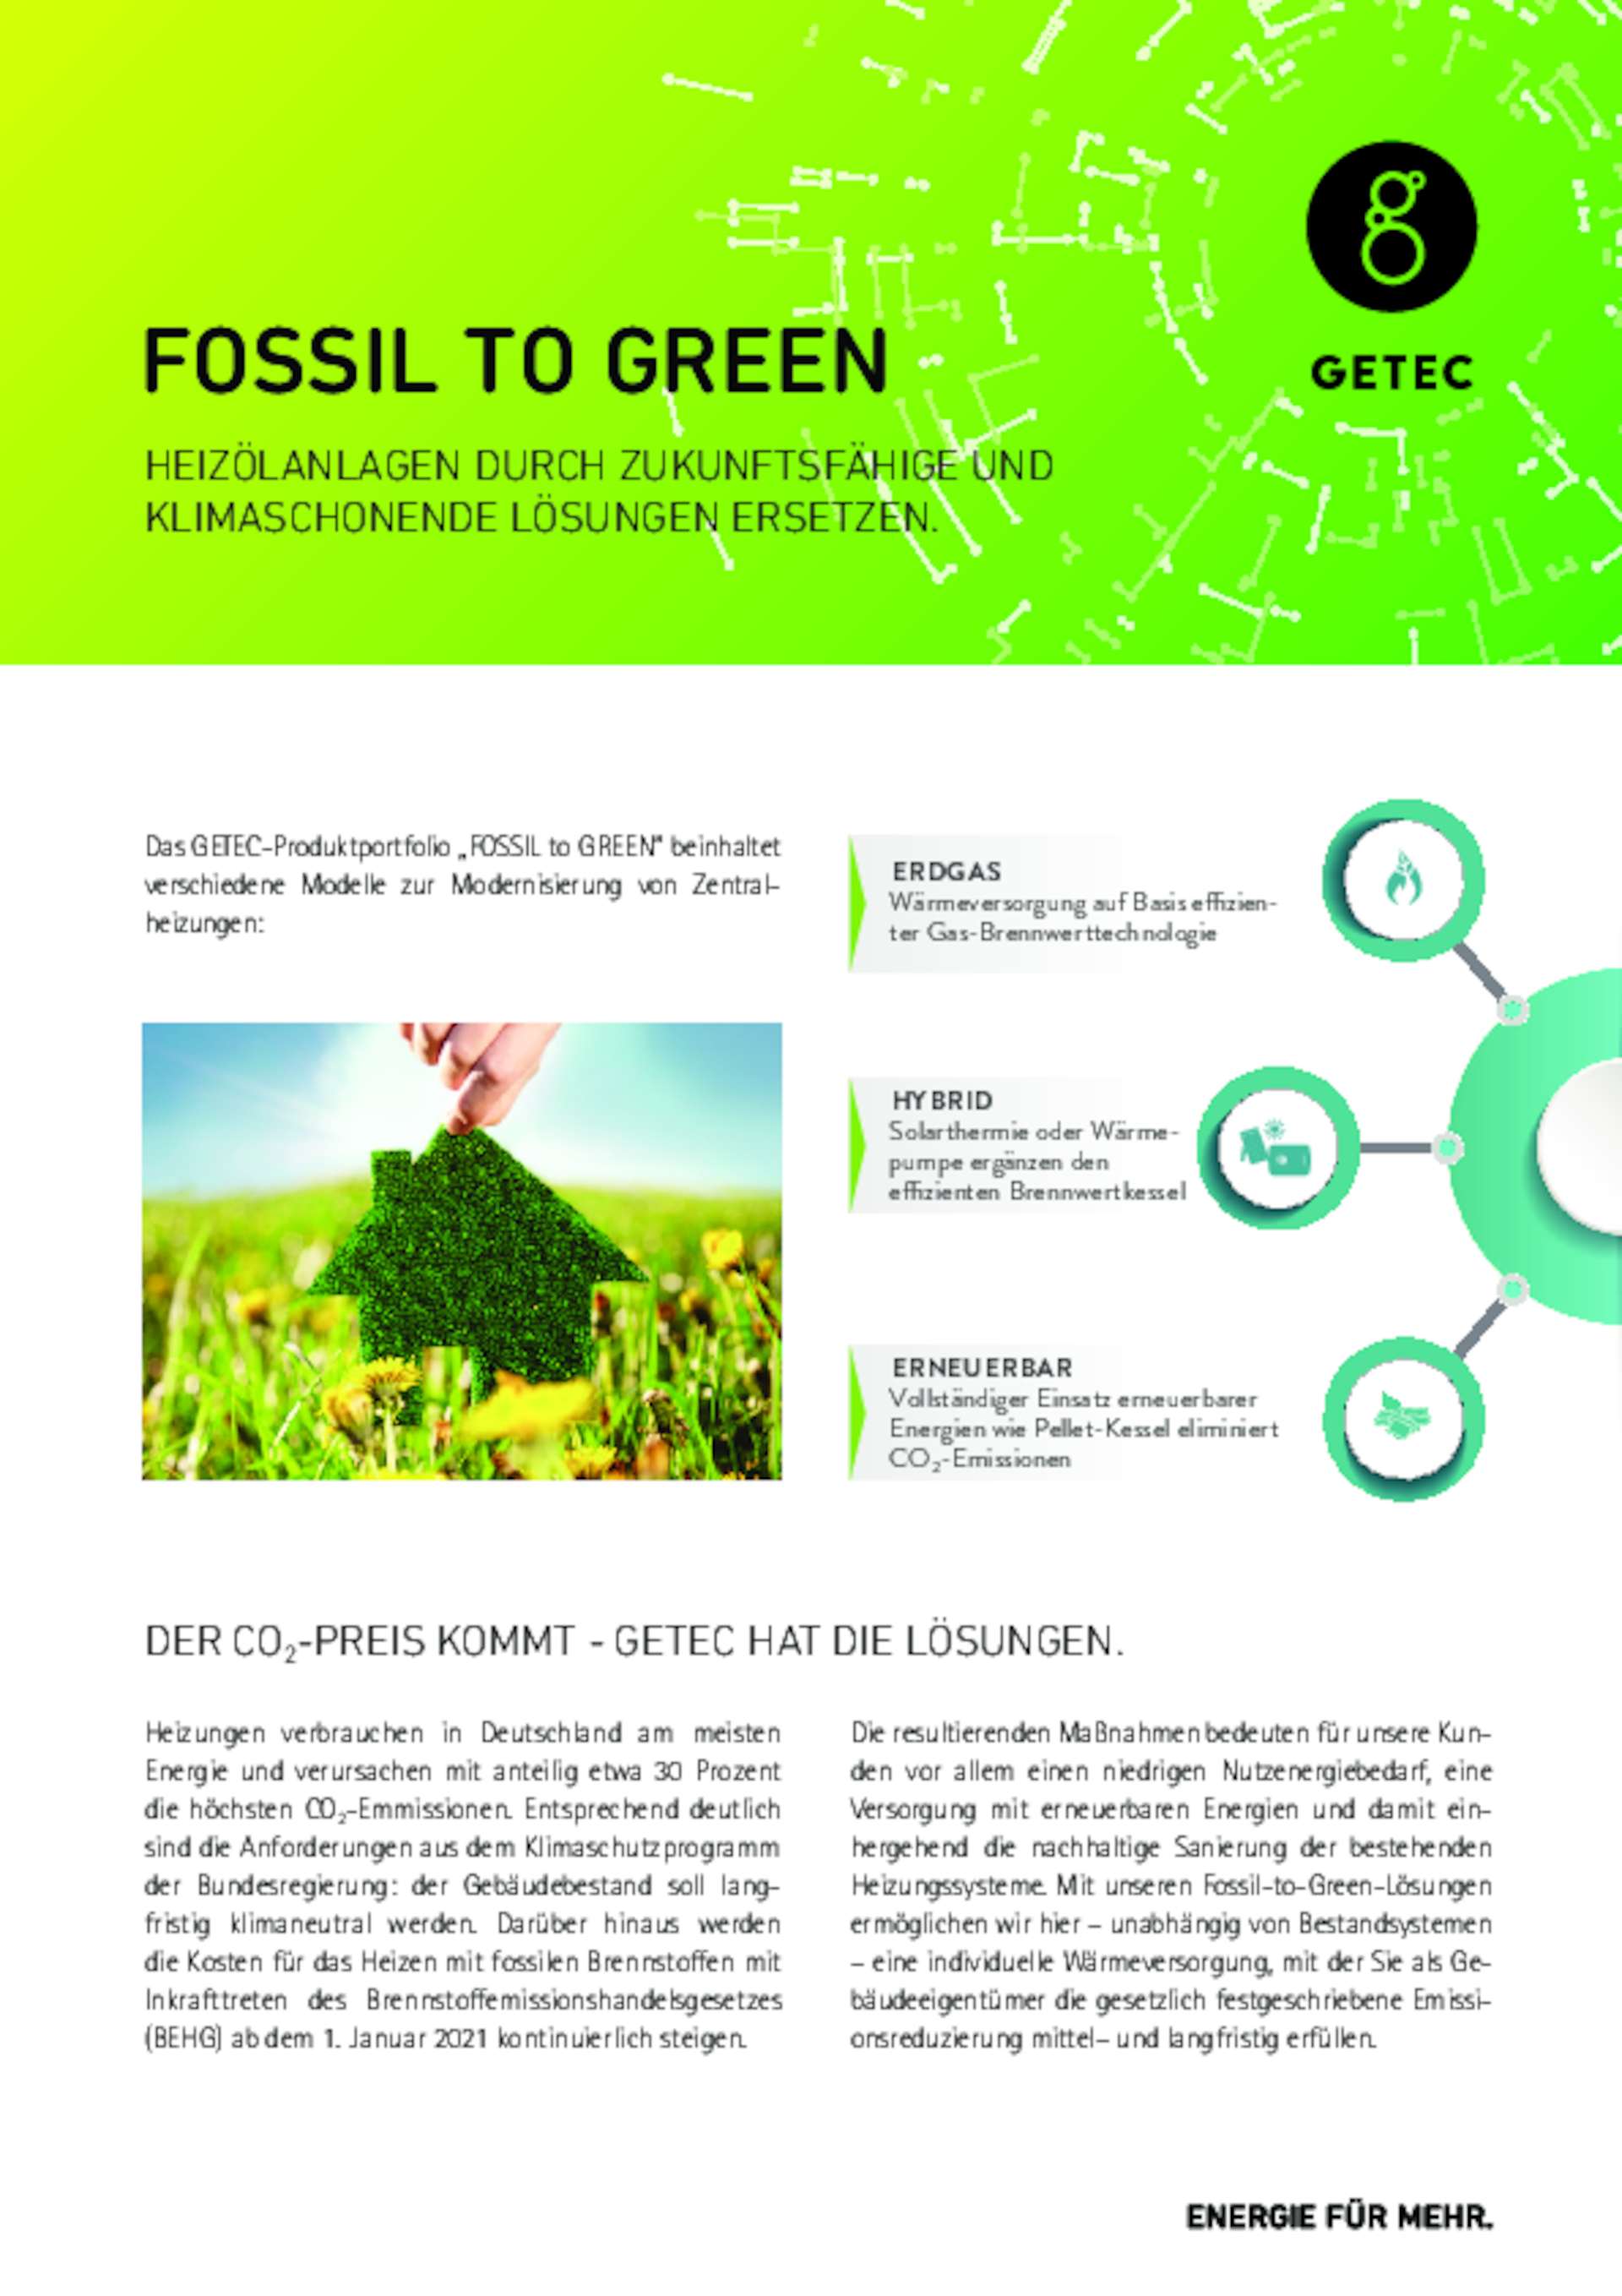 GETEC FOSSIL to GREEN 